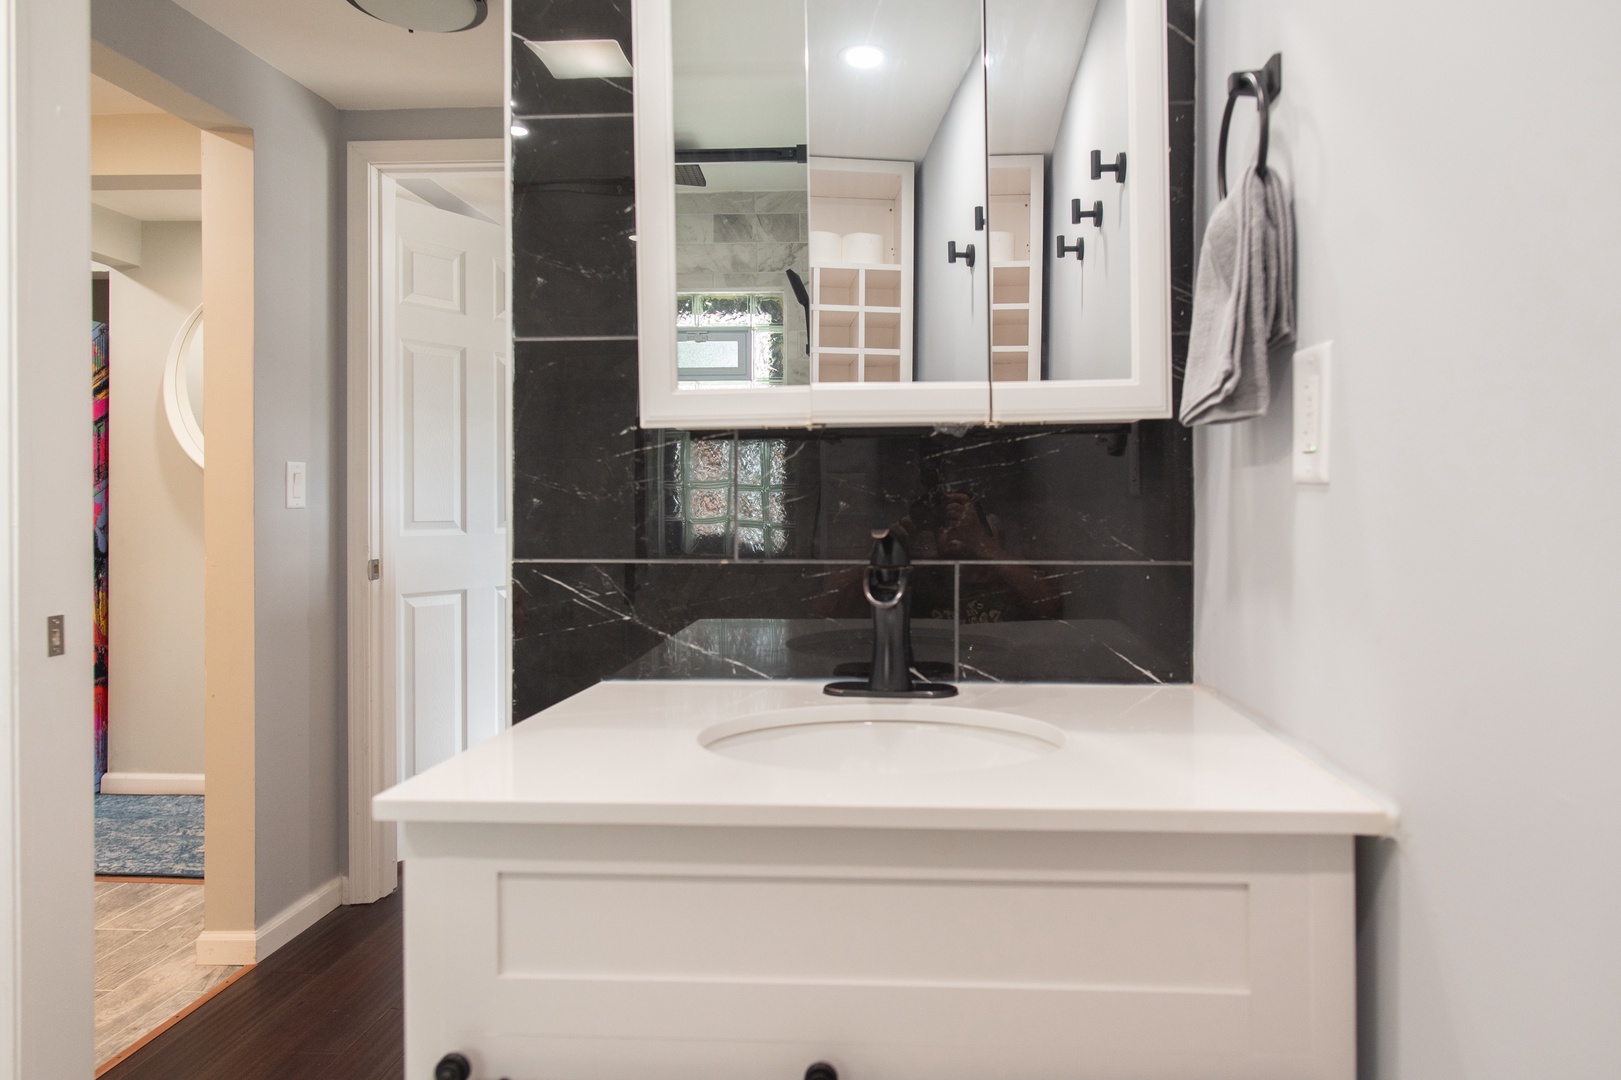 The apartment’s full bathroom offers a single vanity & glass shower